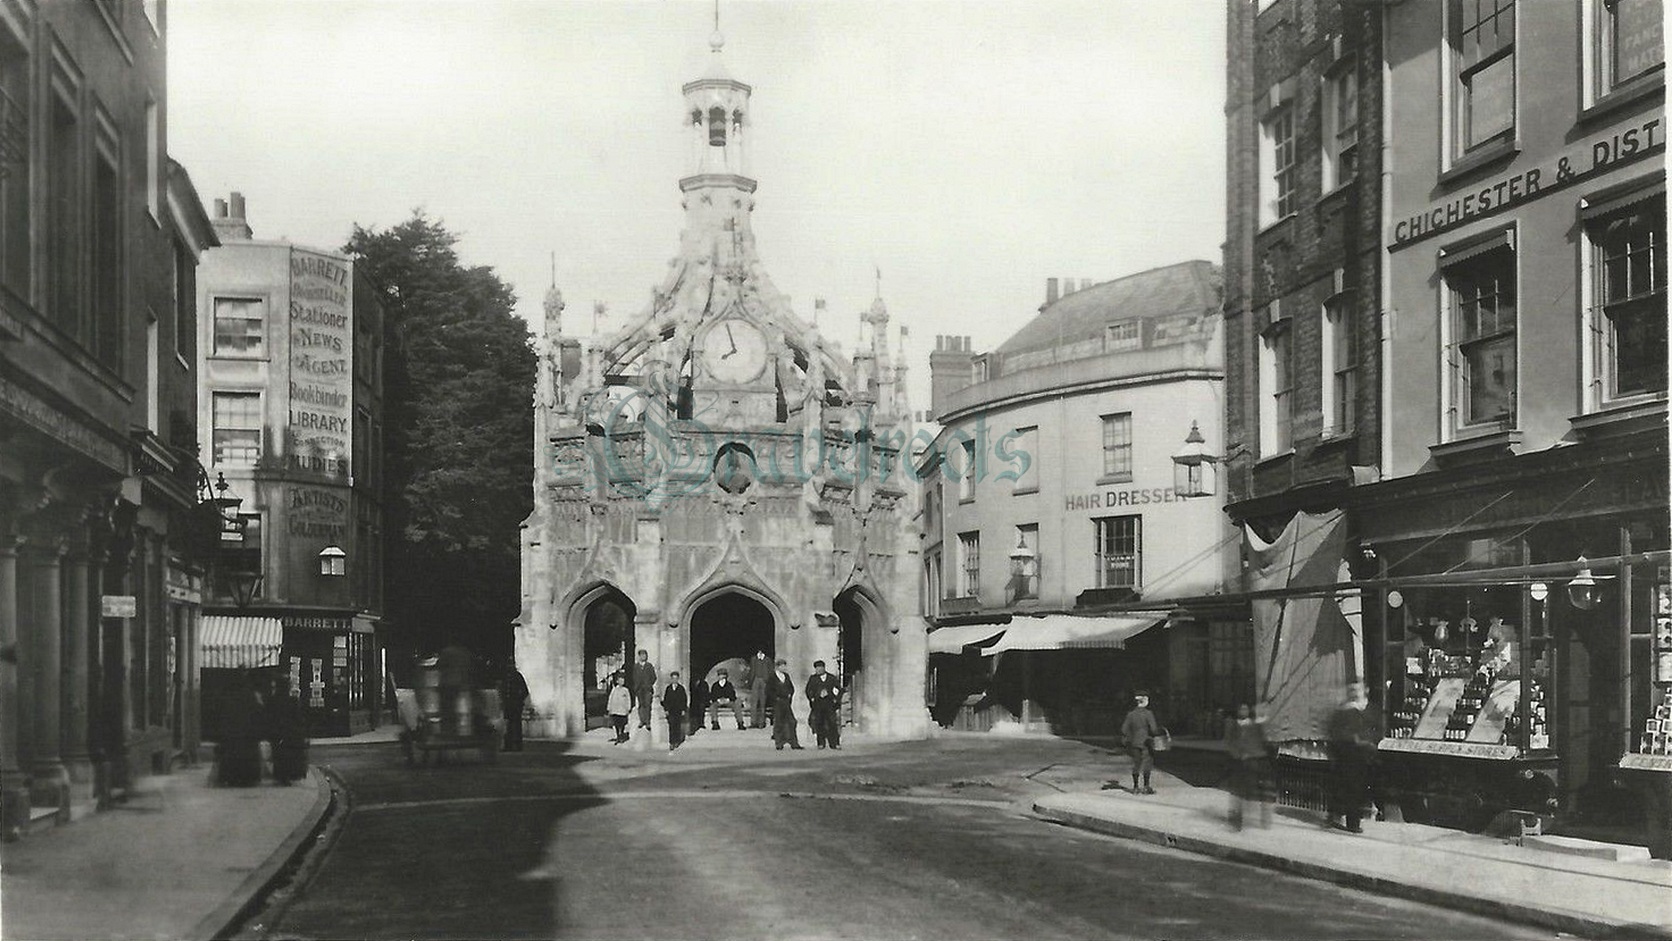  old photos of Chichester, Sussex - click image to return